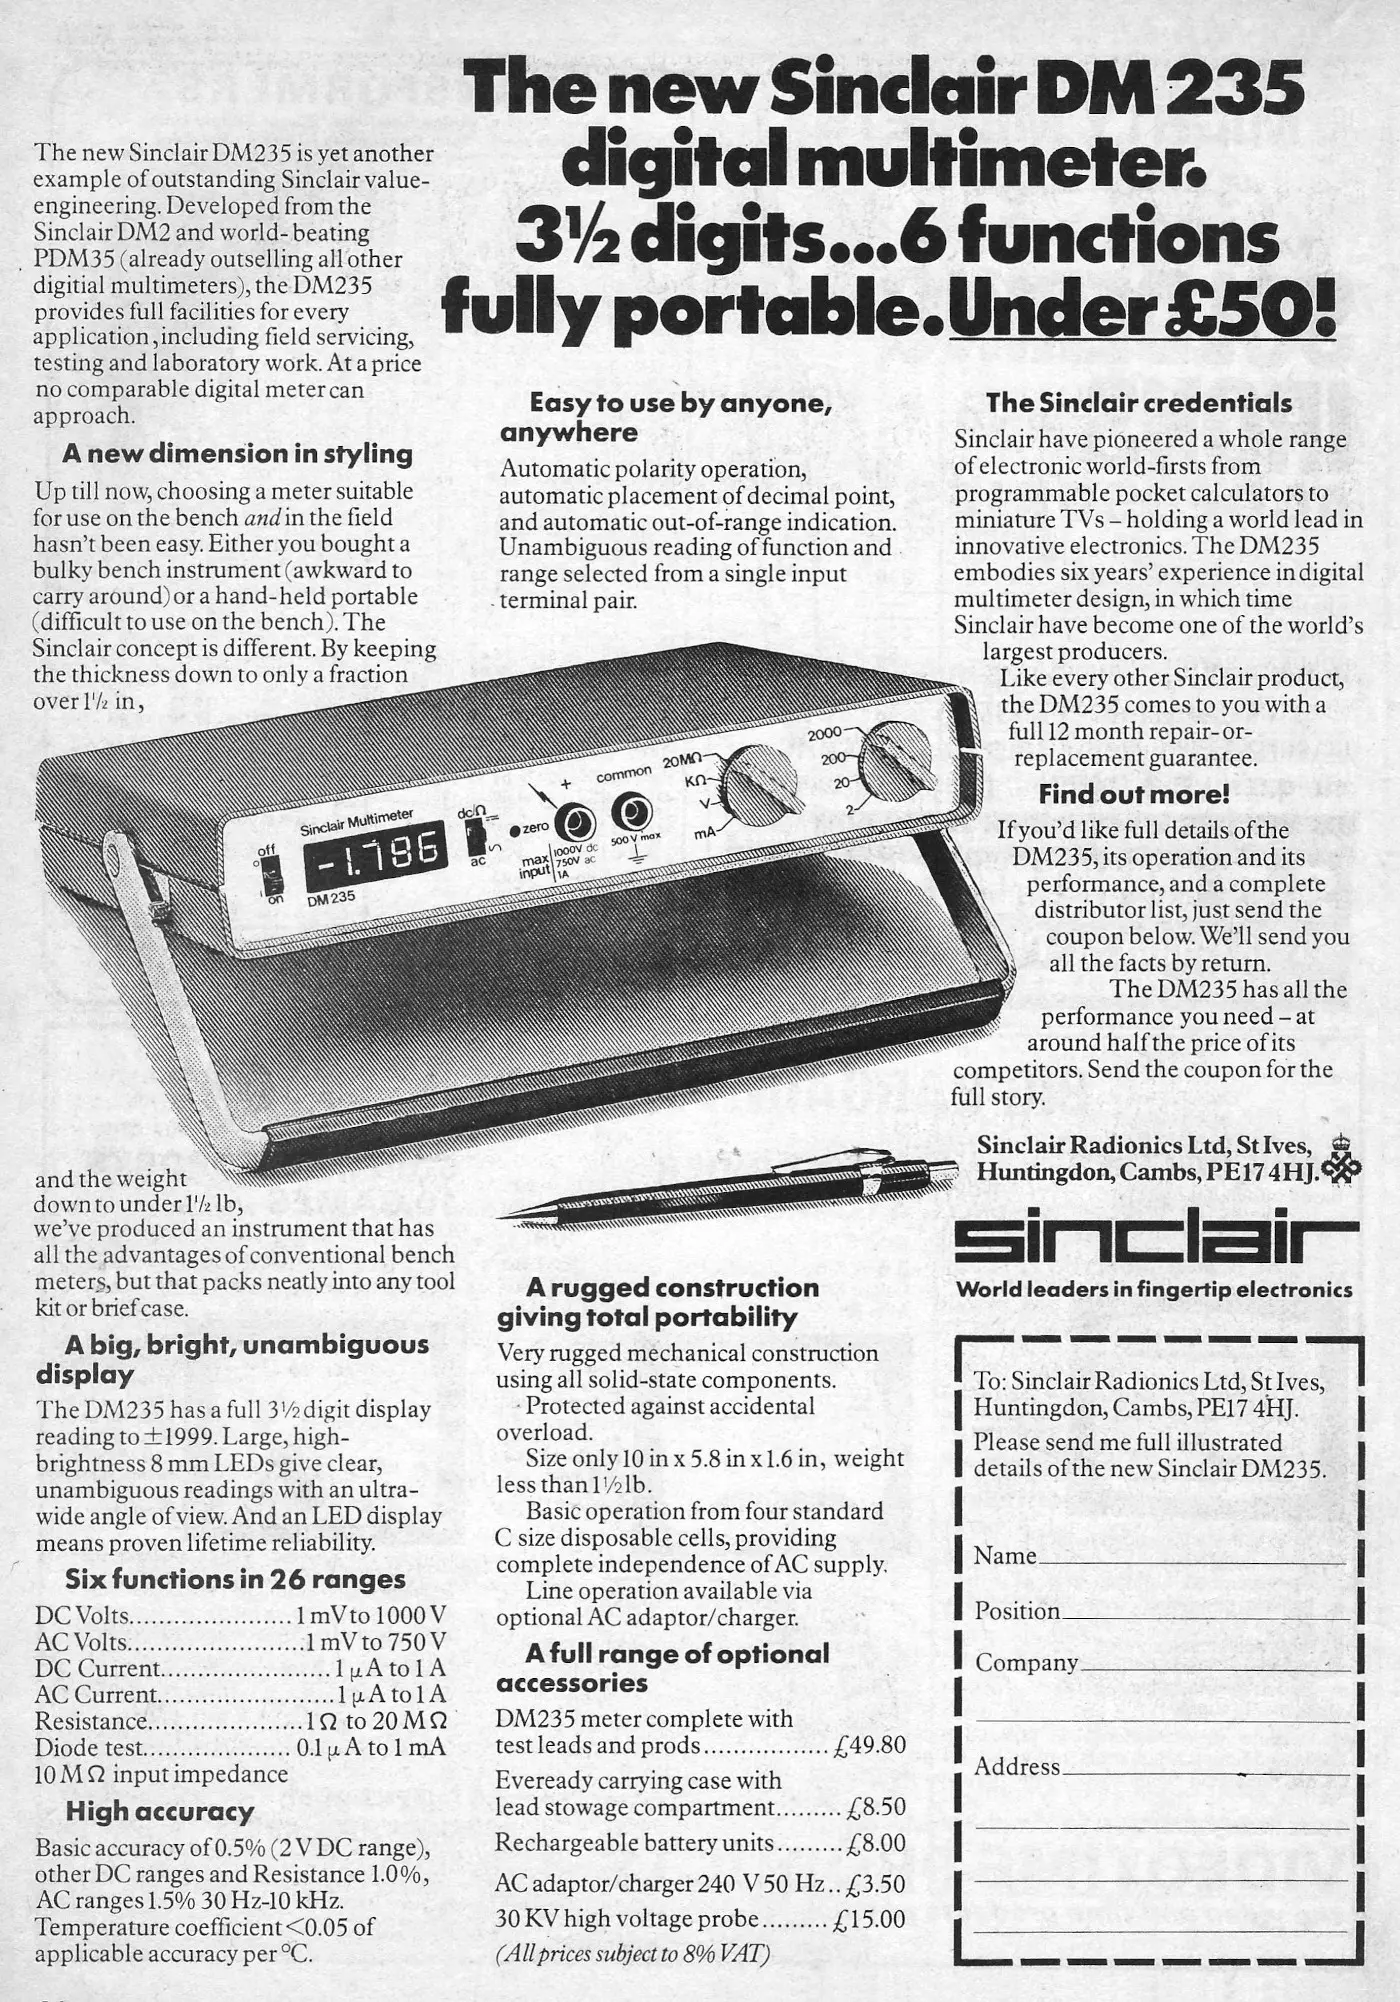 Sinclair Advert: The new Sinclair DM235 digital multimeter. 3.5 digits. Under £50!, from Electronics Today, June 1978